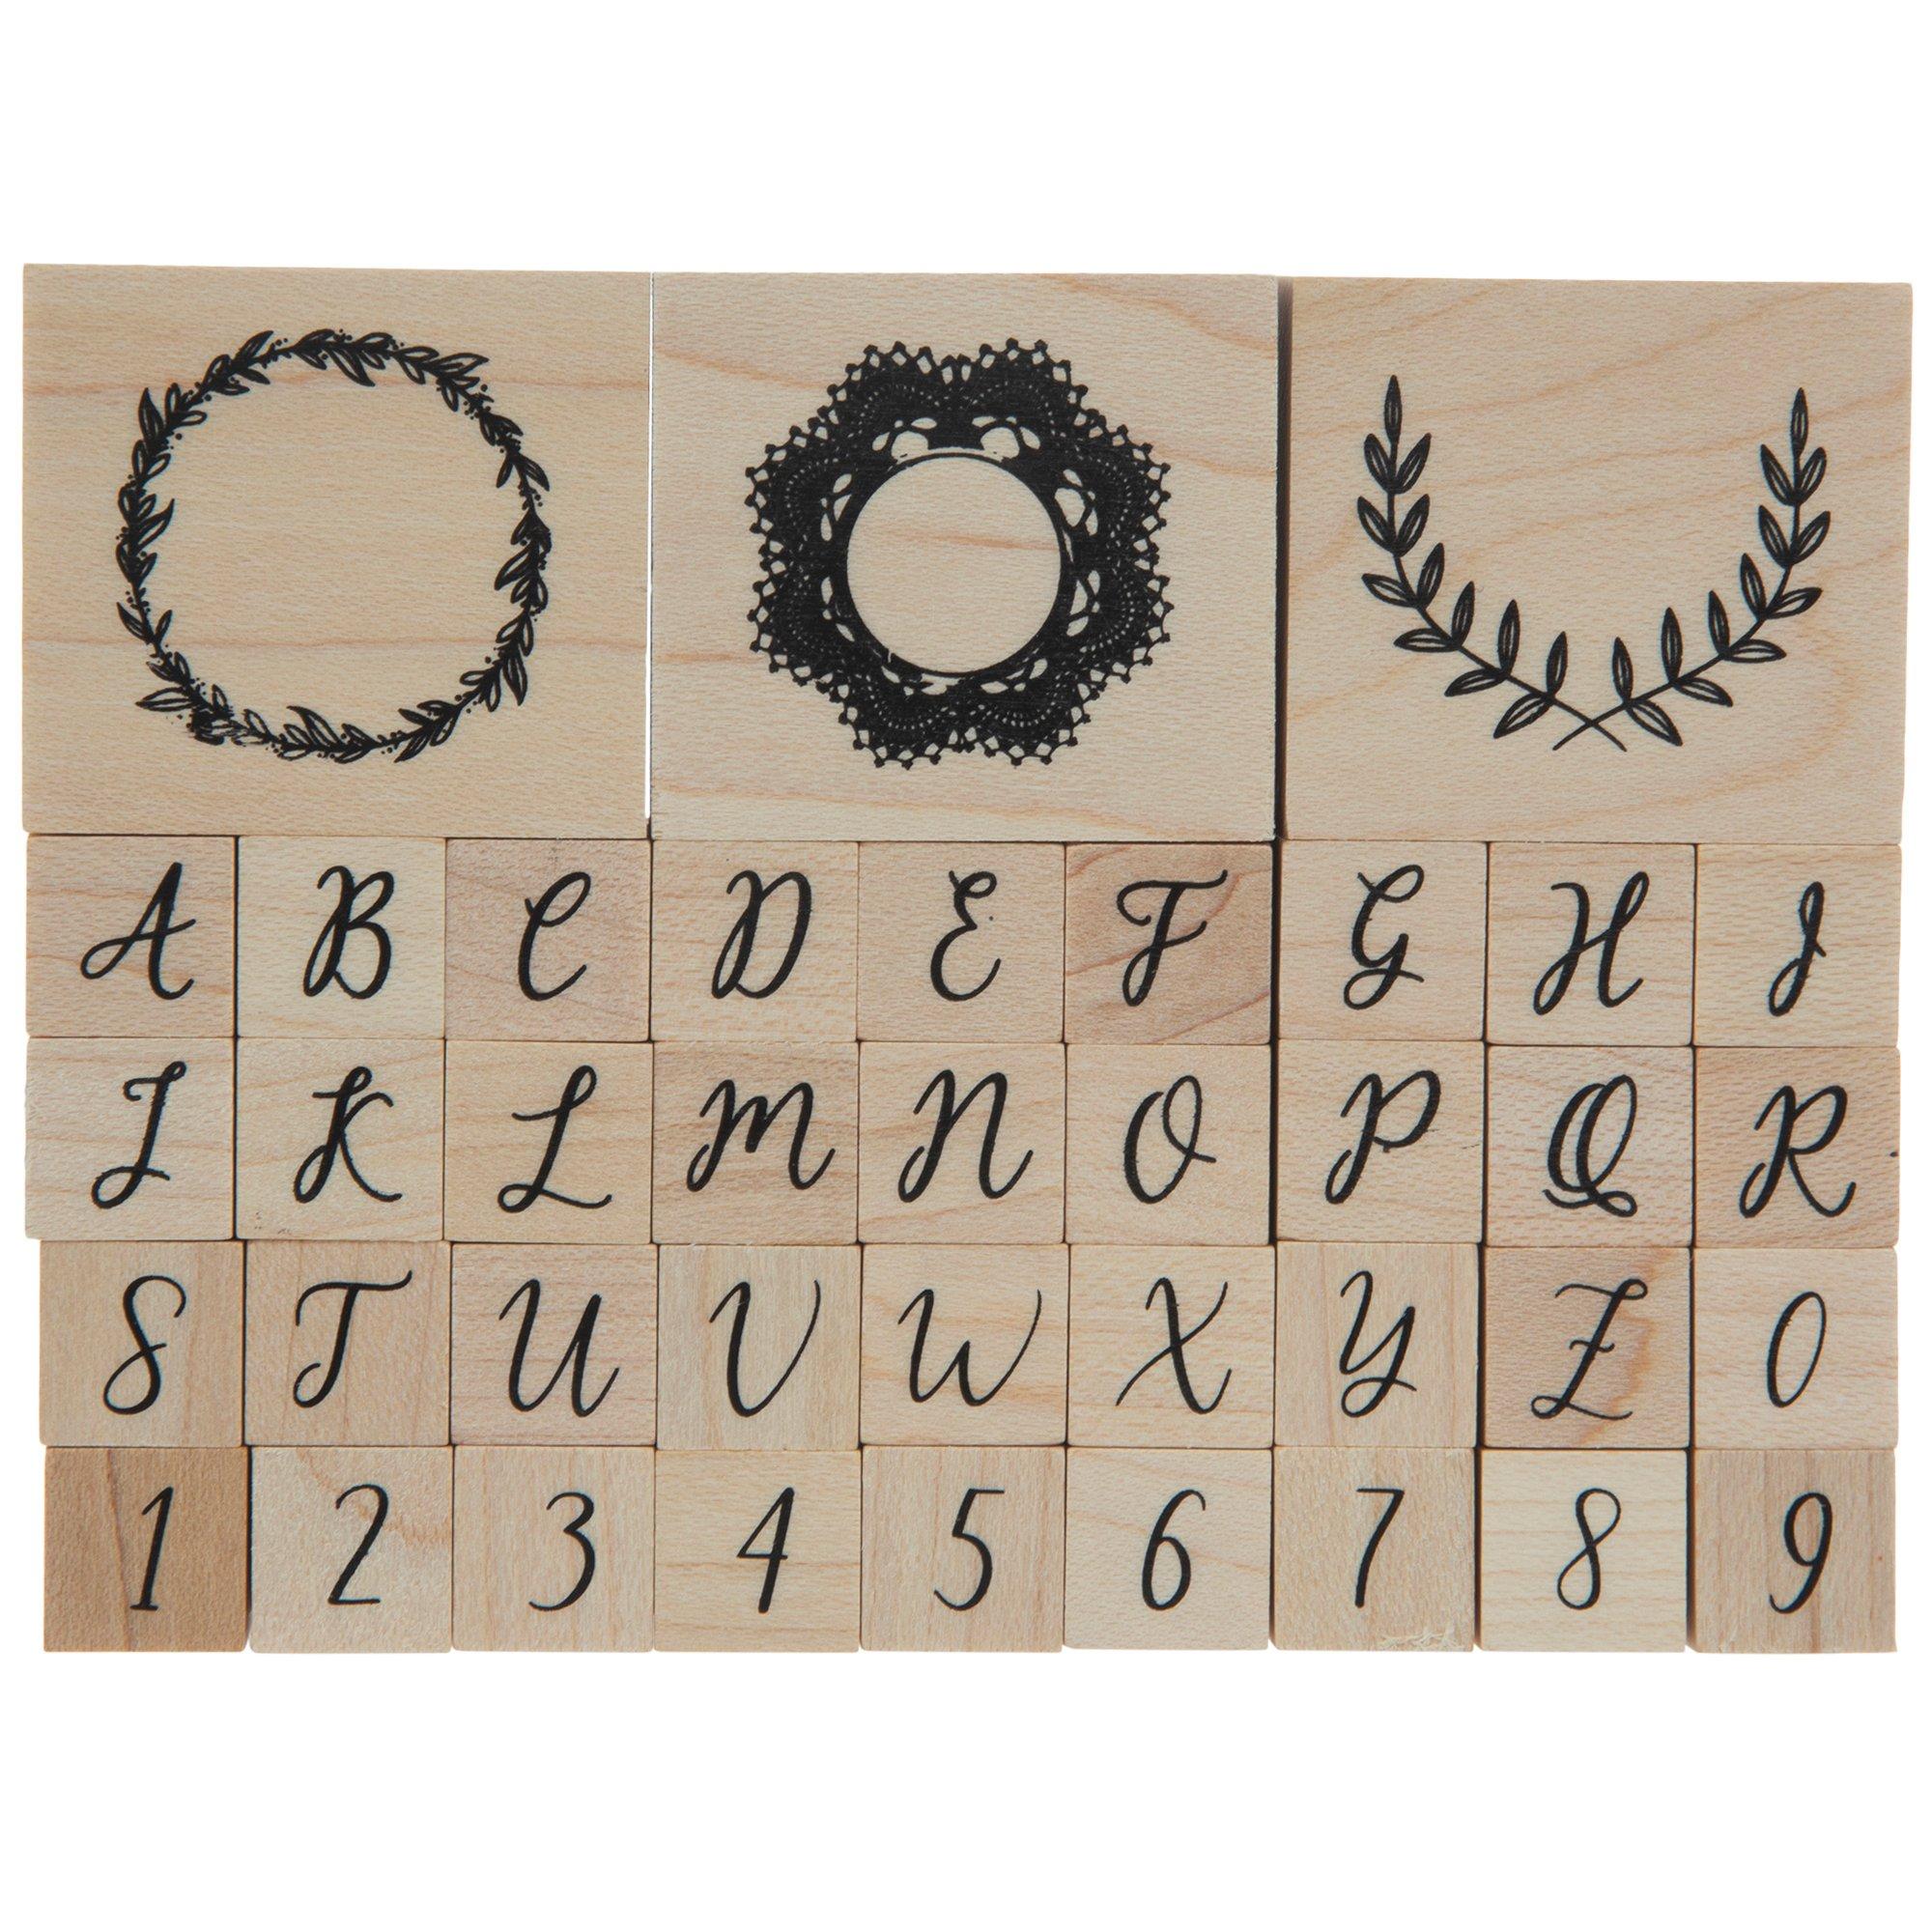 Rubber Letter Stamps Small